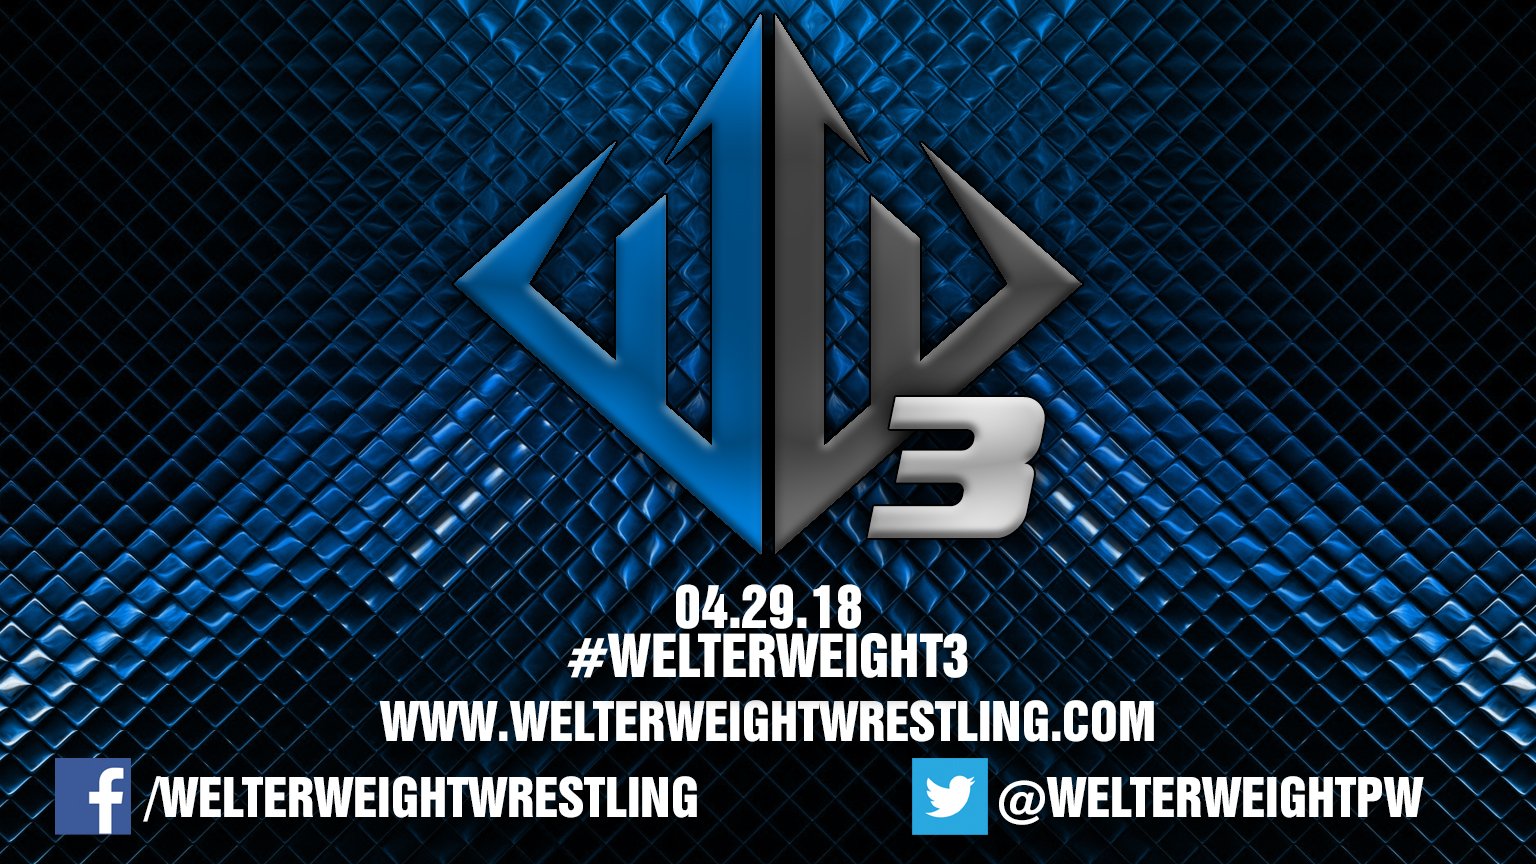 Welterweight Wrestling Weekly #3: Pillman Jr, Jason Kincaid, Gregory Iron, Trey Miguel, Stevie Fierce & More Round Out Final Roster; Free Sample Of Welterweight 2 Main Event